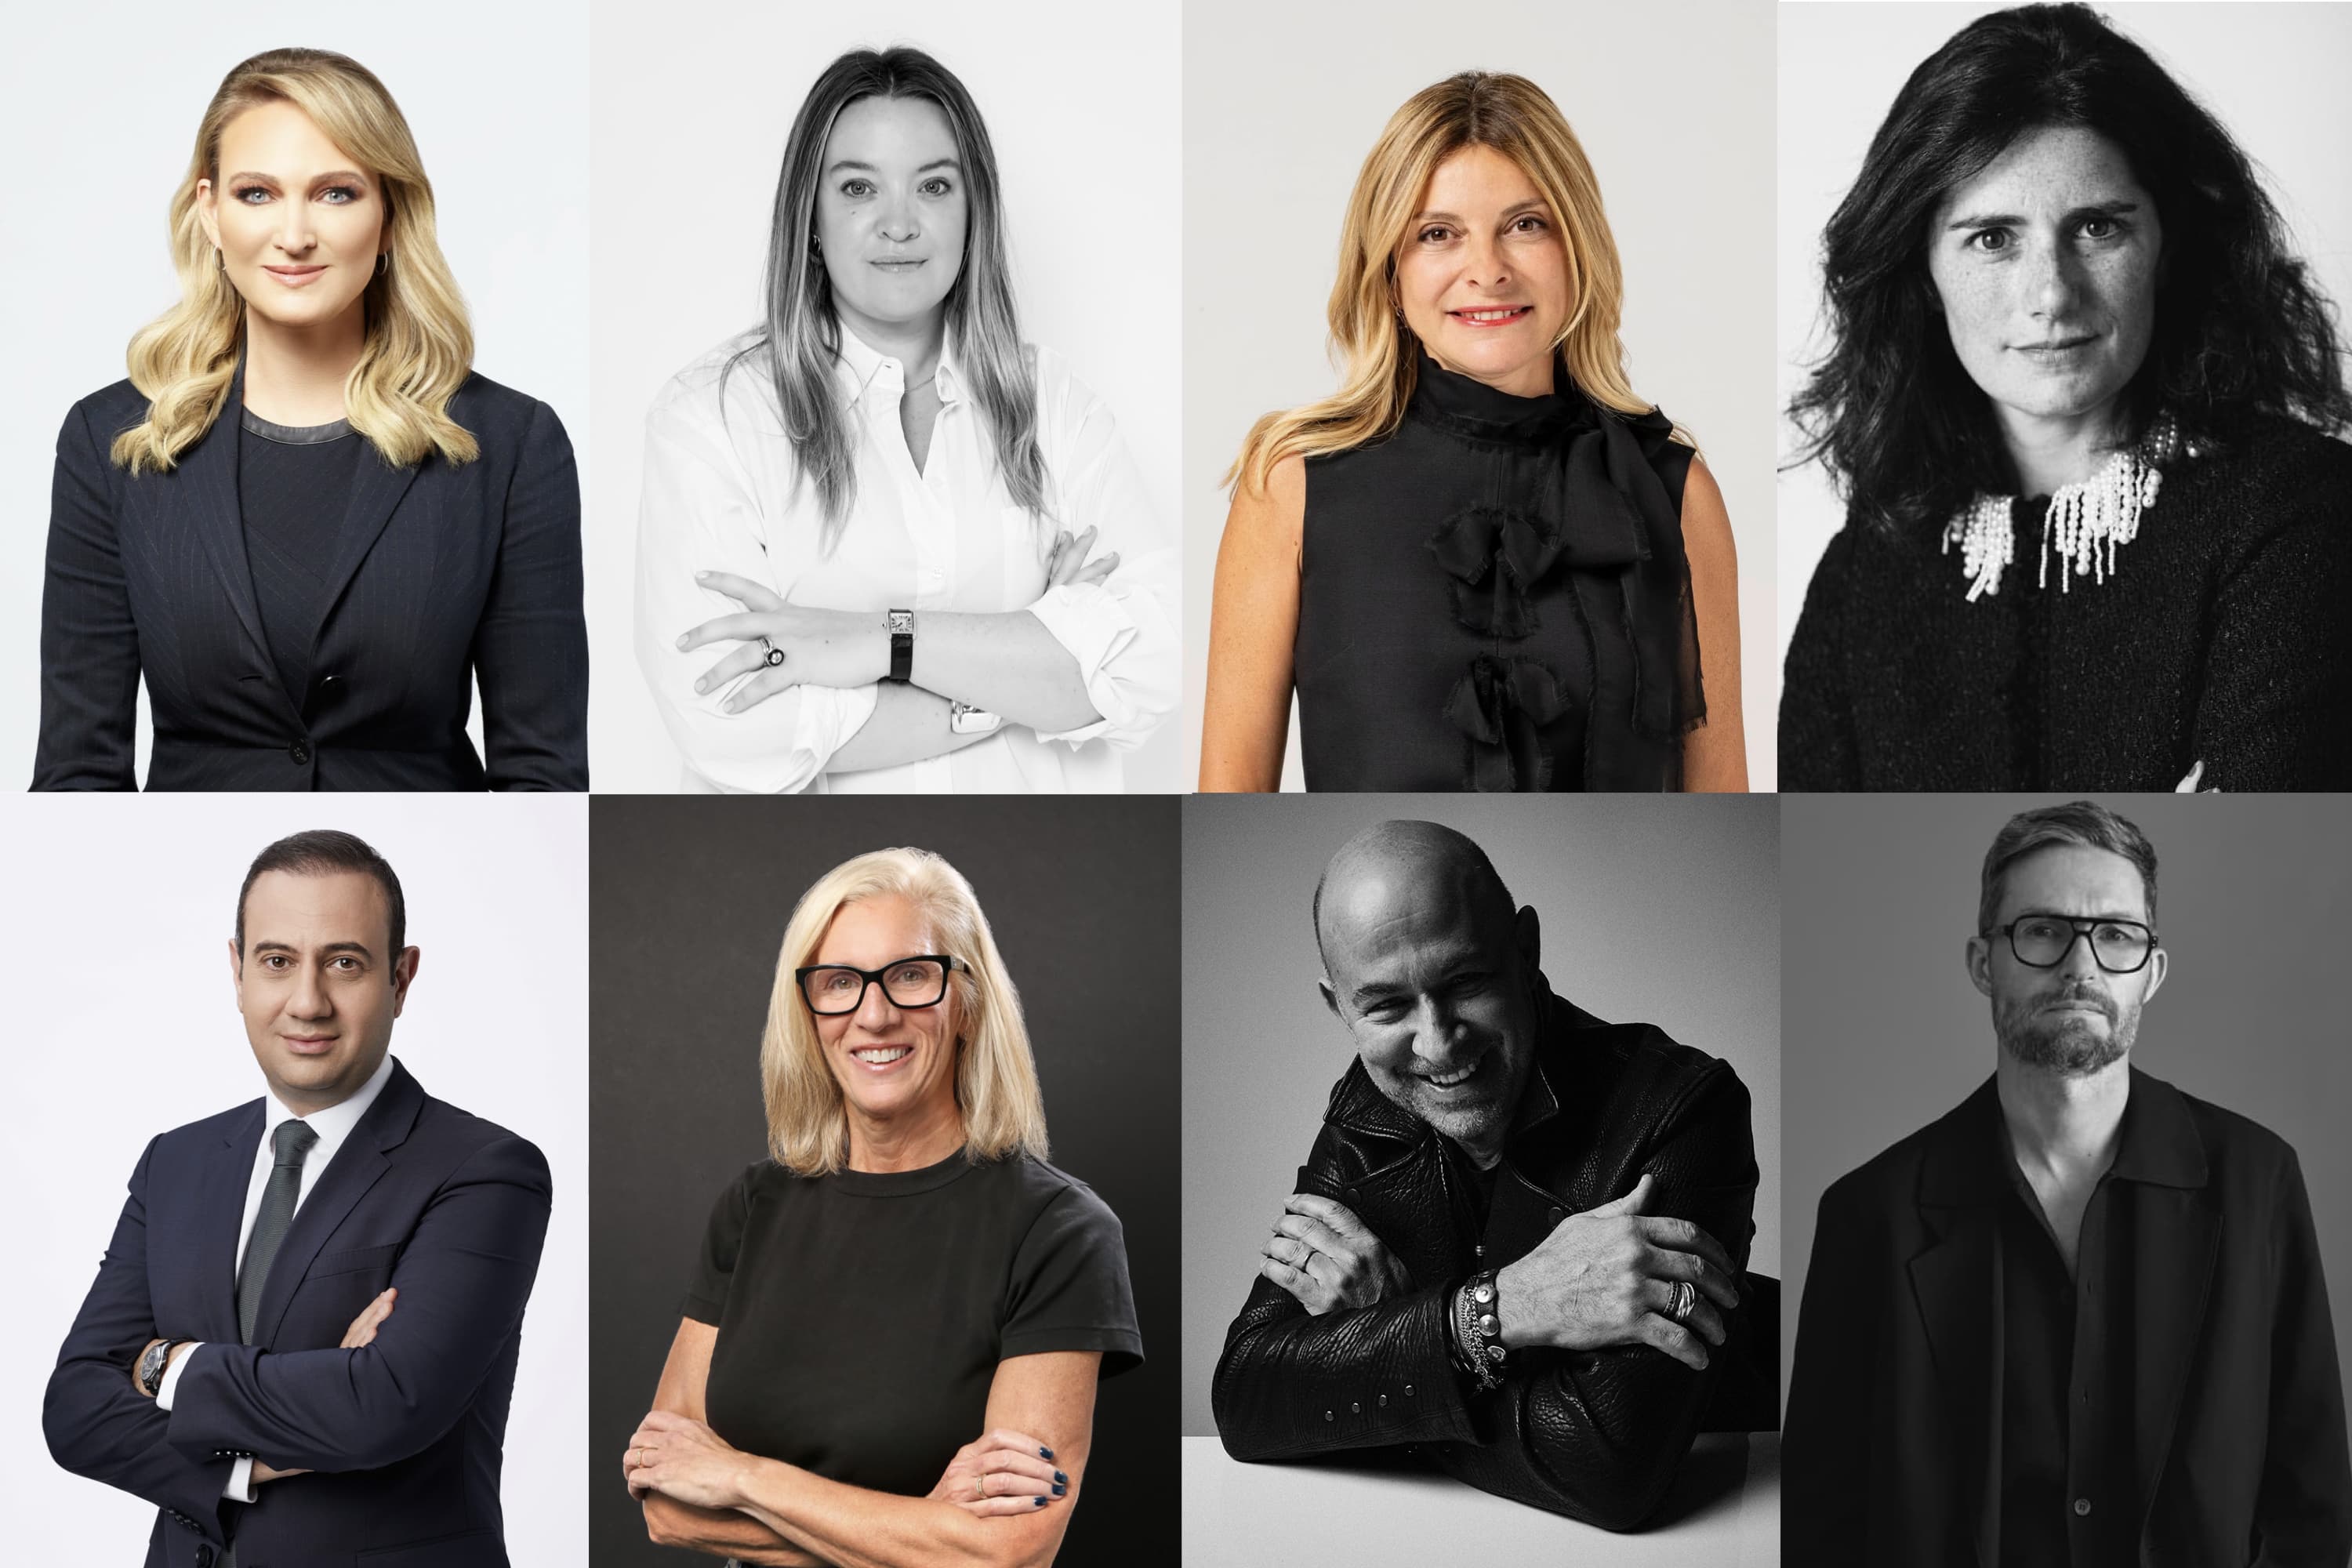 Calvin Klein, Inc. Announces the Opening of Multi-Brand Lifestyle